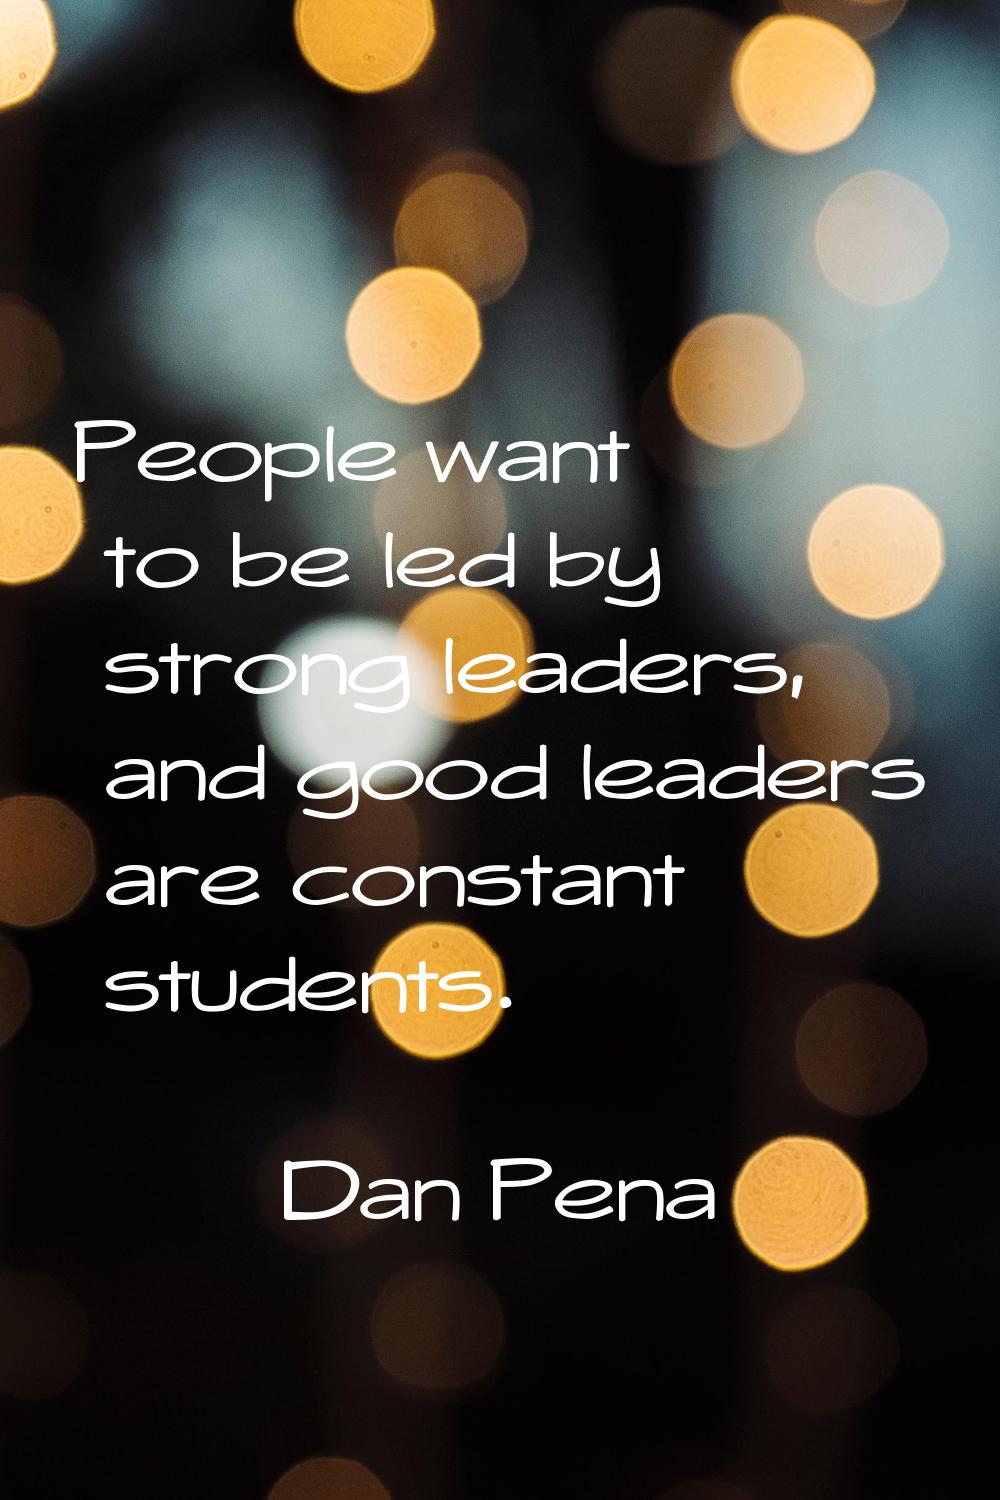 People want to be led by strong leaders, and good leaders are constant students.